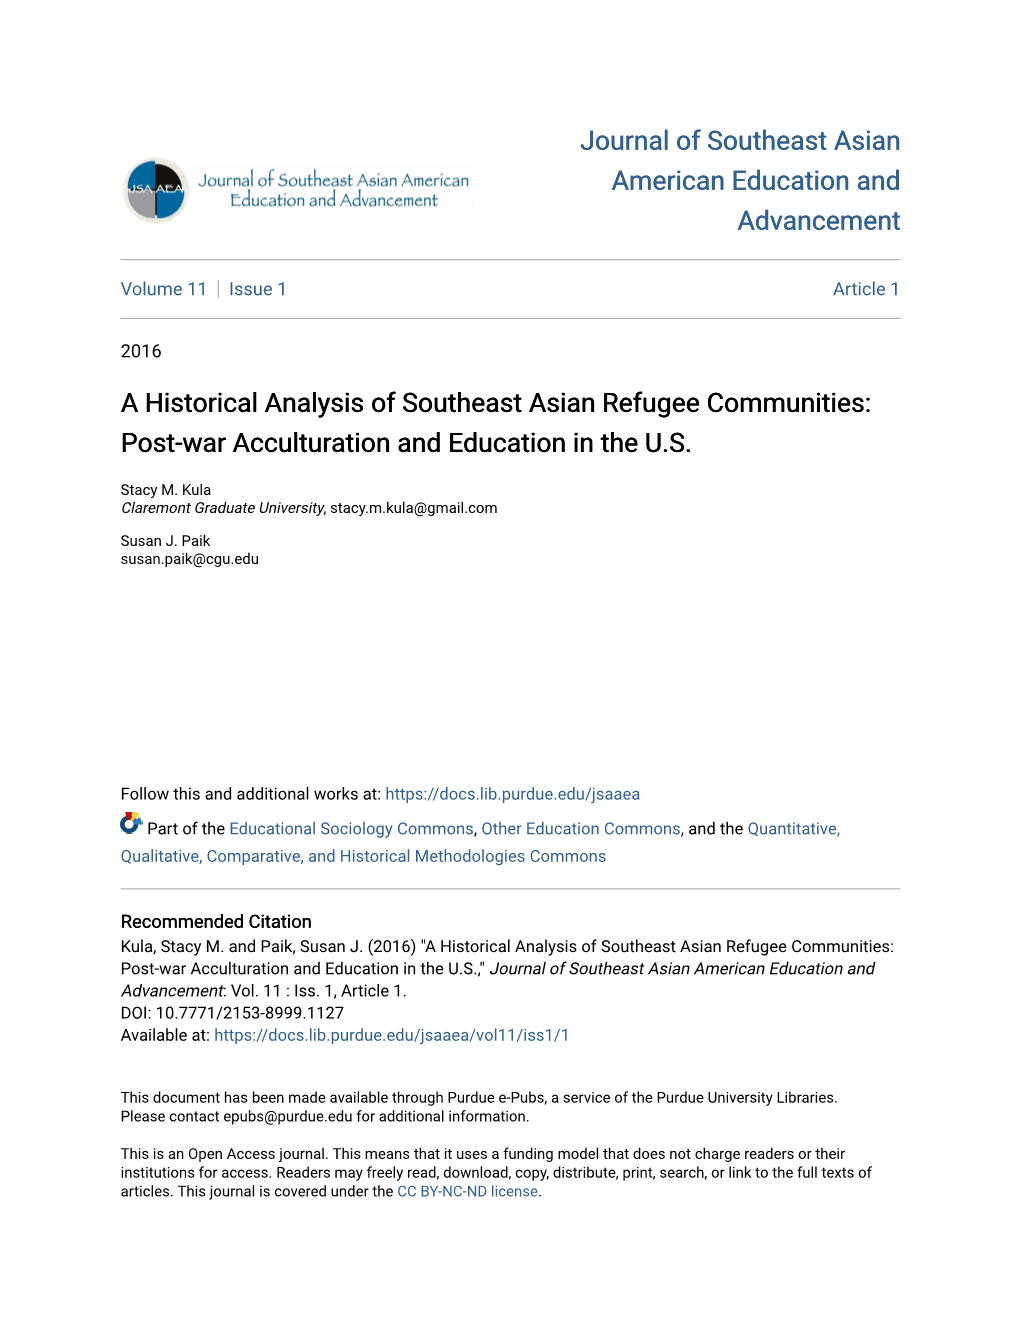 A Historical Analysis of Southeast Asian Refugee Communities: Post-War Acculturation and Education in the U.S